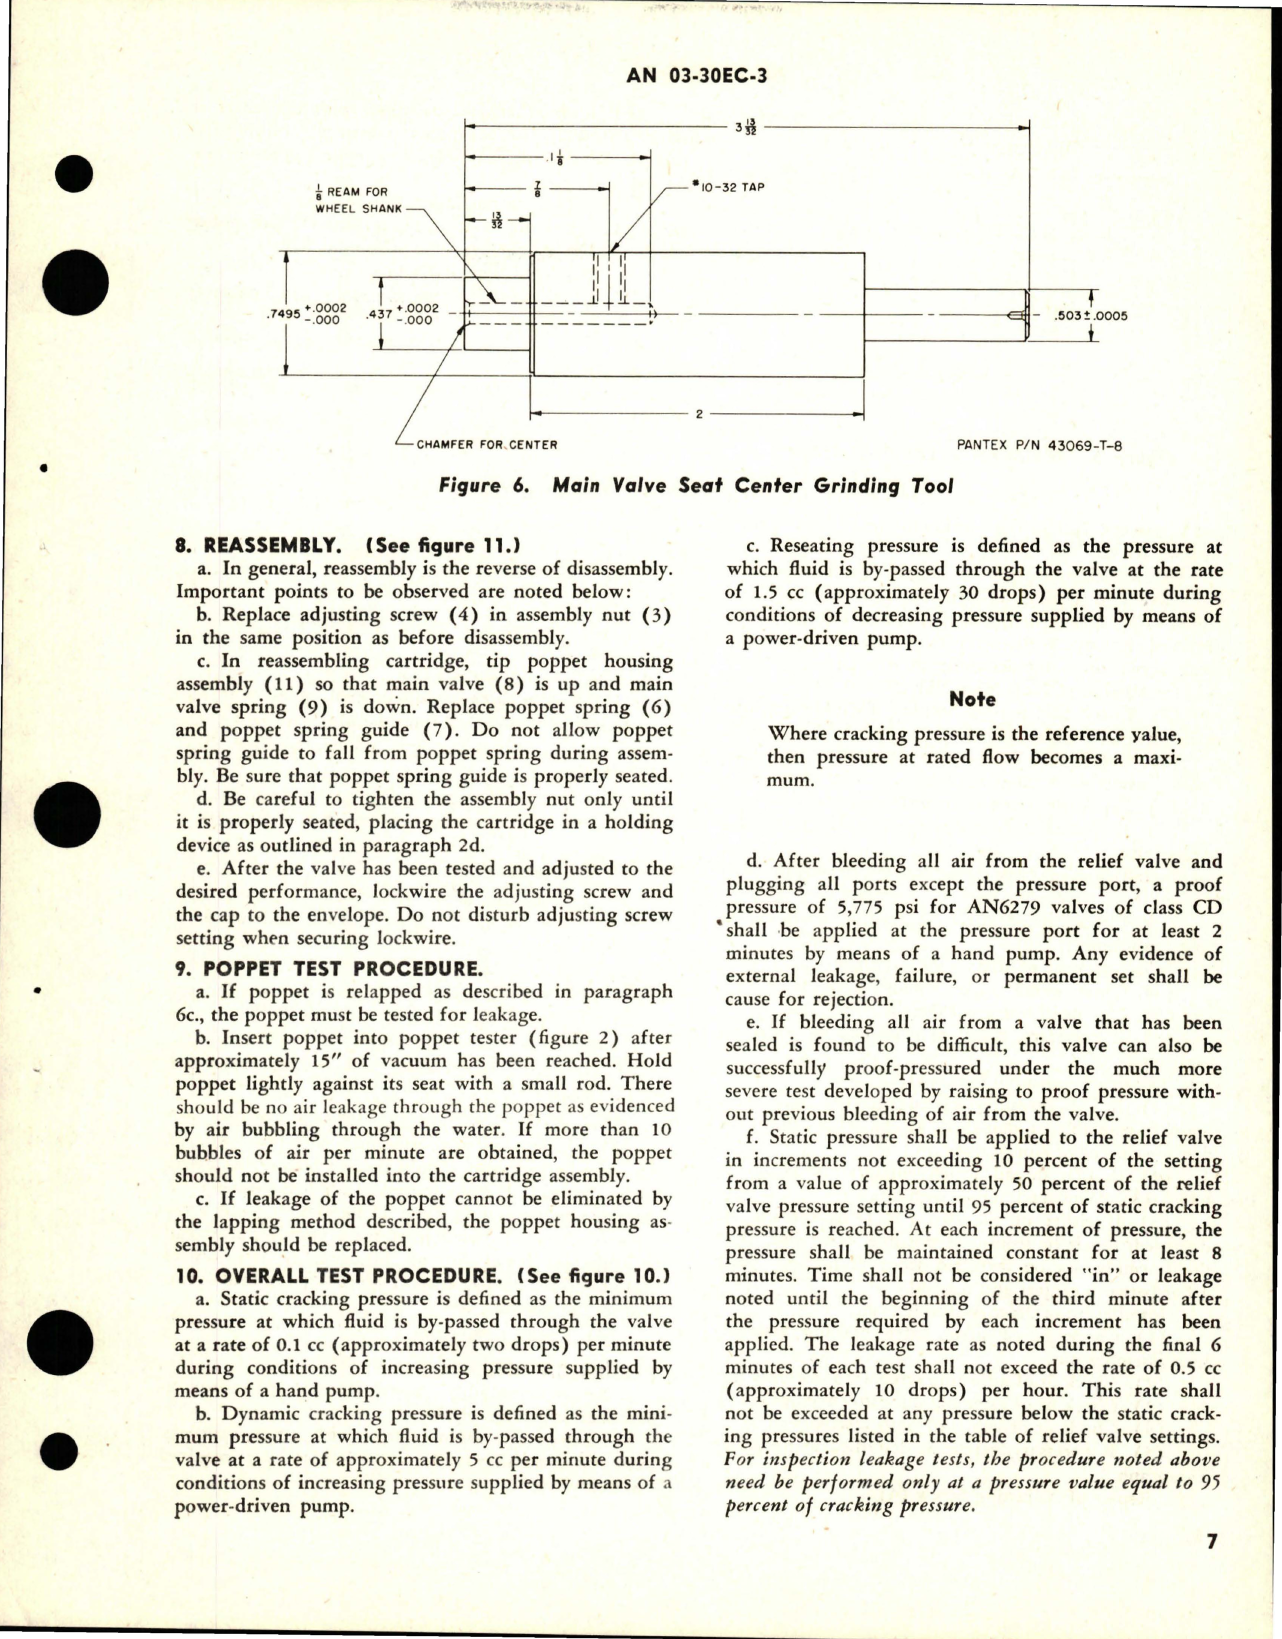 Sample page 7 from AirCorps Library document: Overhaul Instructions with Parts Breakdown for Hydraulic Pressure Relief Valve - HPLV-A0